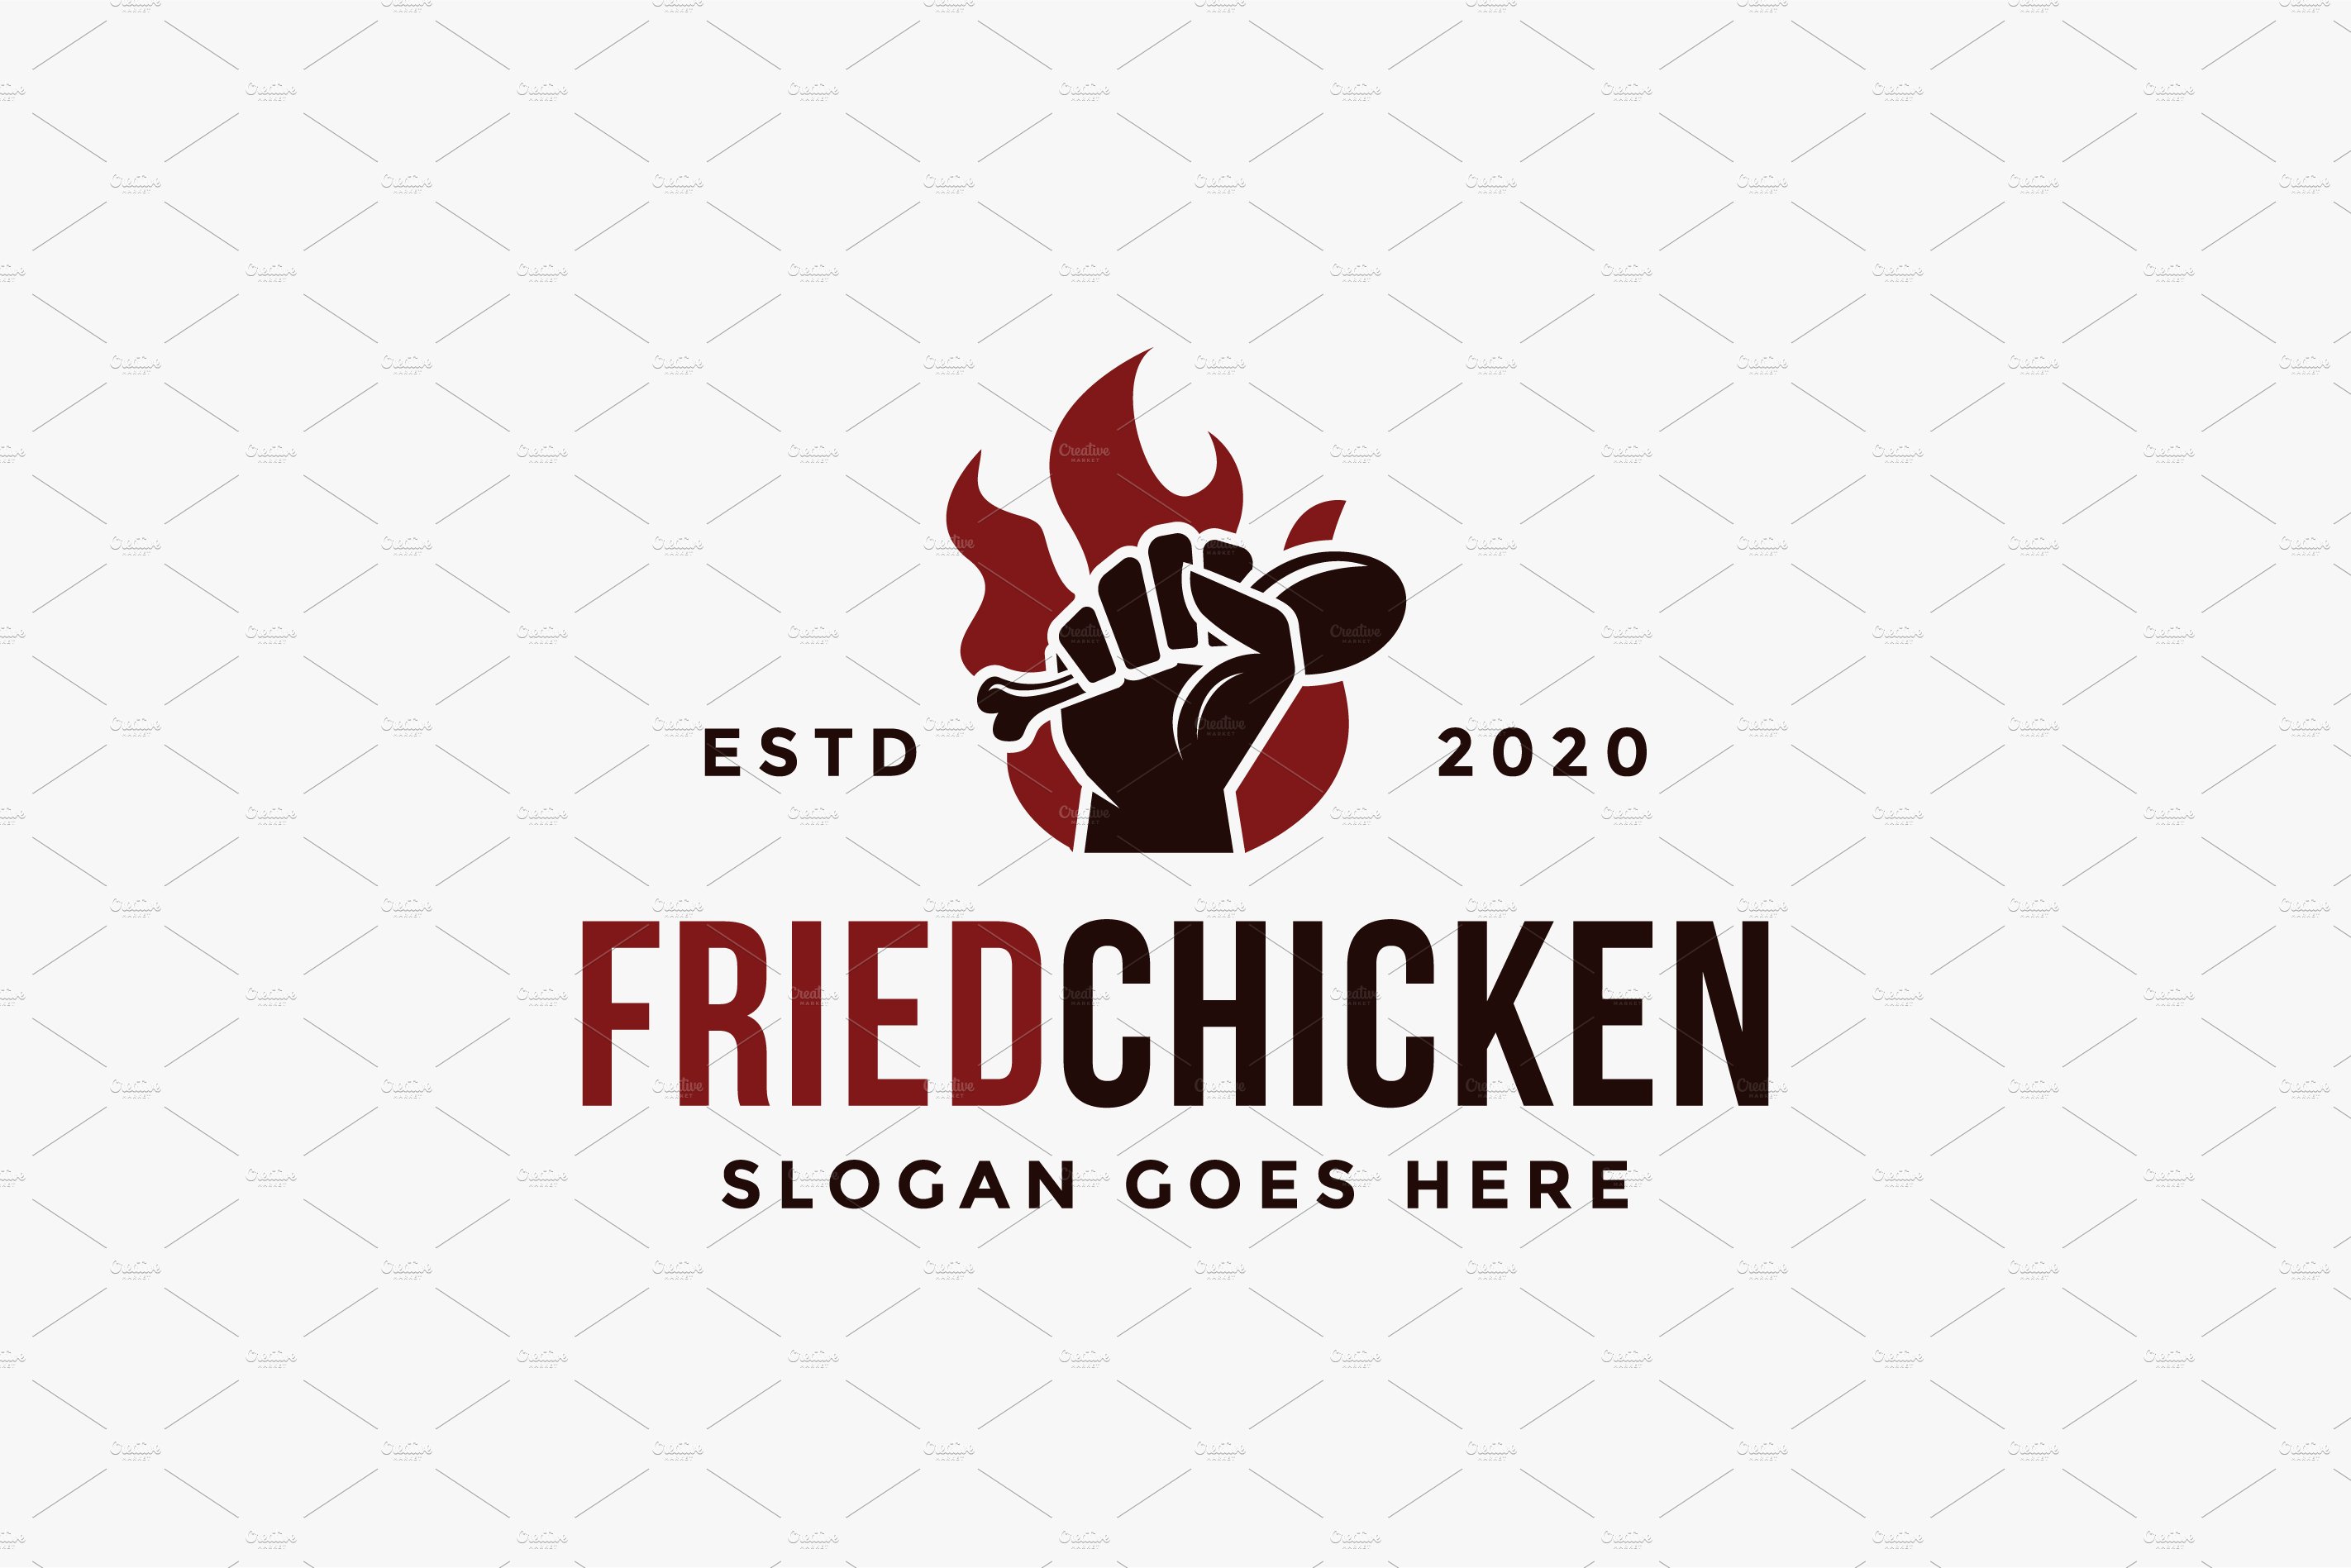 Hand holding hot fried chicken logo cover image.